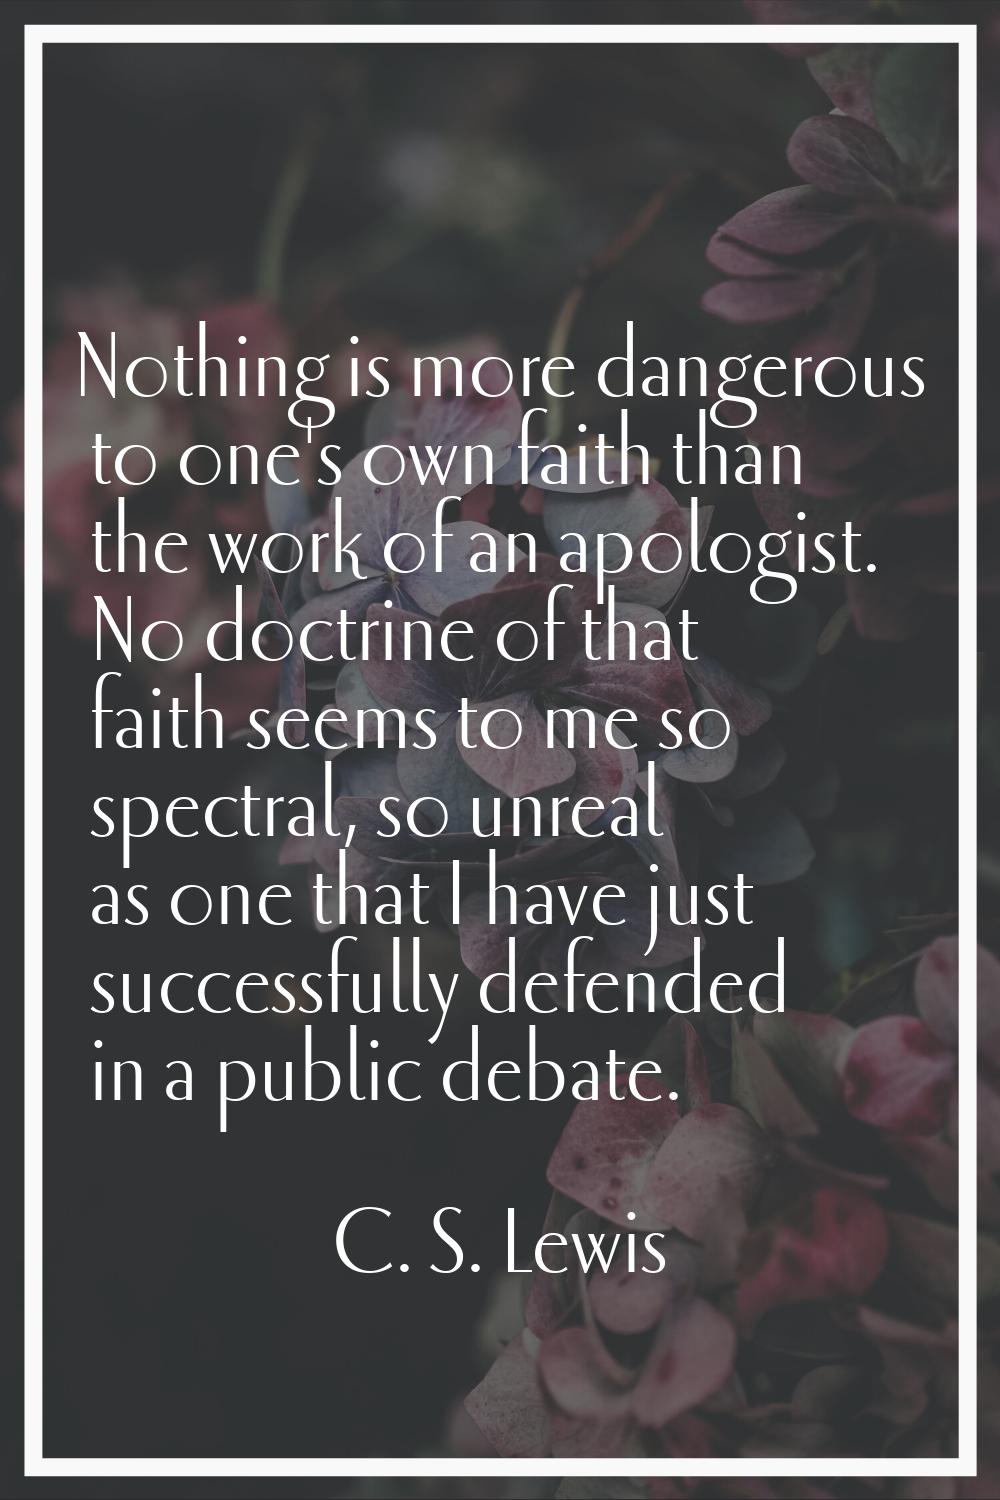 Nothing is more dangerous to one's own faith than the work of an apologist. No doctrine of that fai